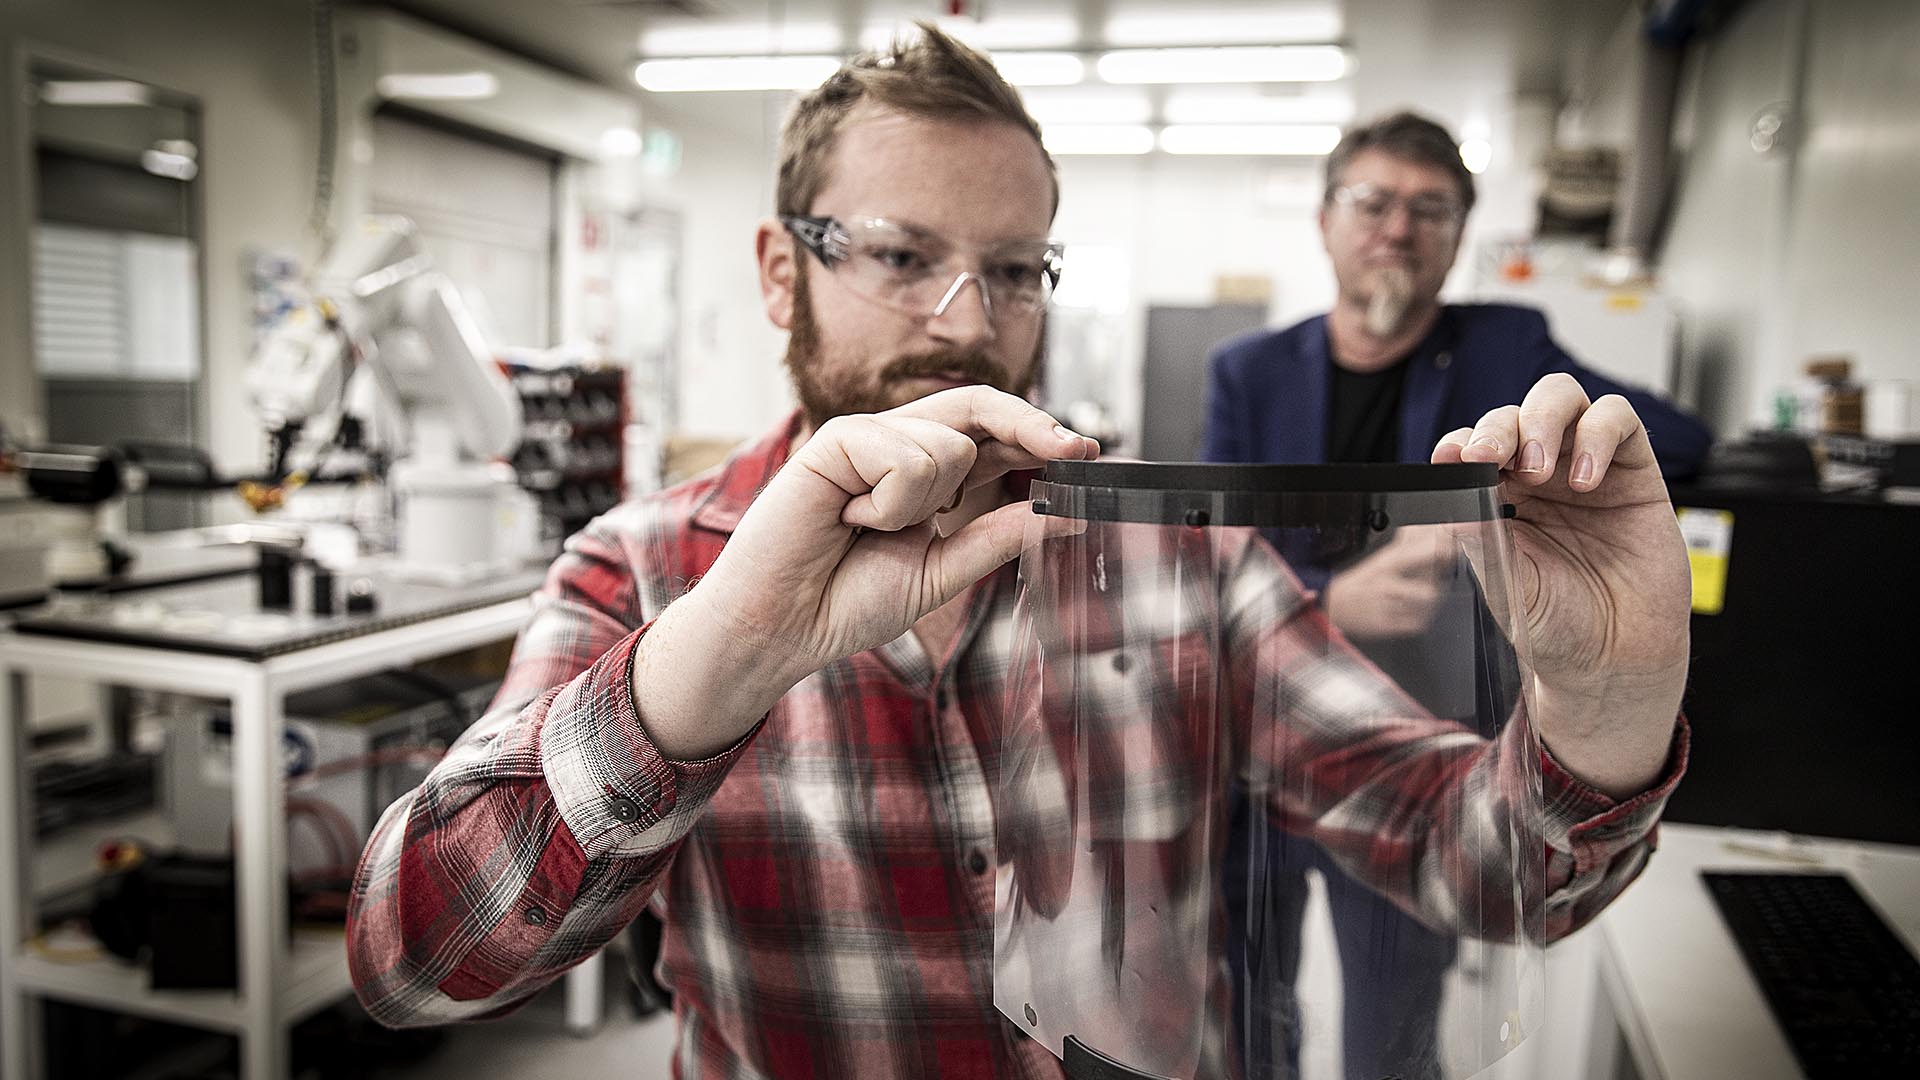 Distinguished Professor Gordon Wallace and additive fabrication technician Cameron Angus at the University of Wollongong’s Translational Research Initiative for Cell Engineering and Printing (TRICEP) facility.